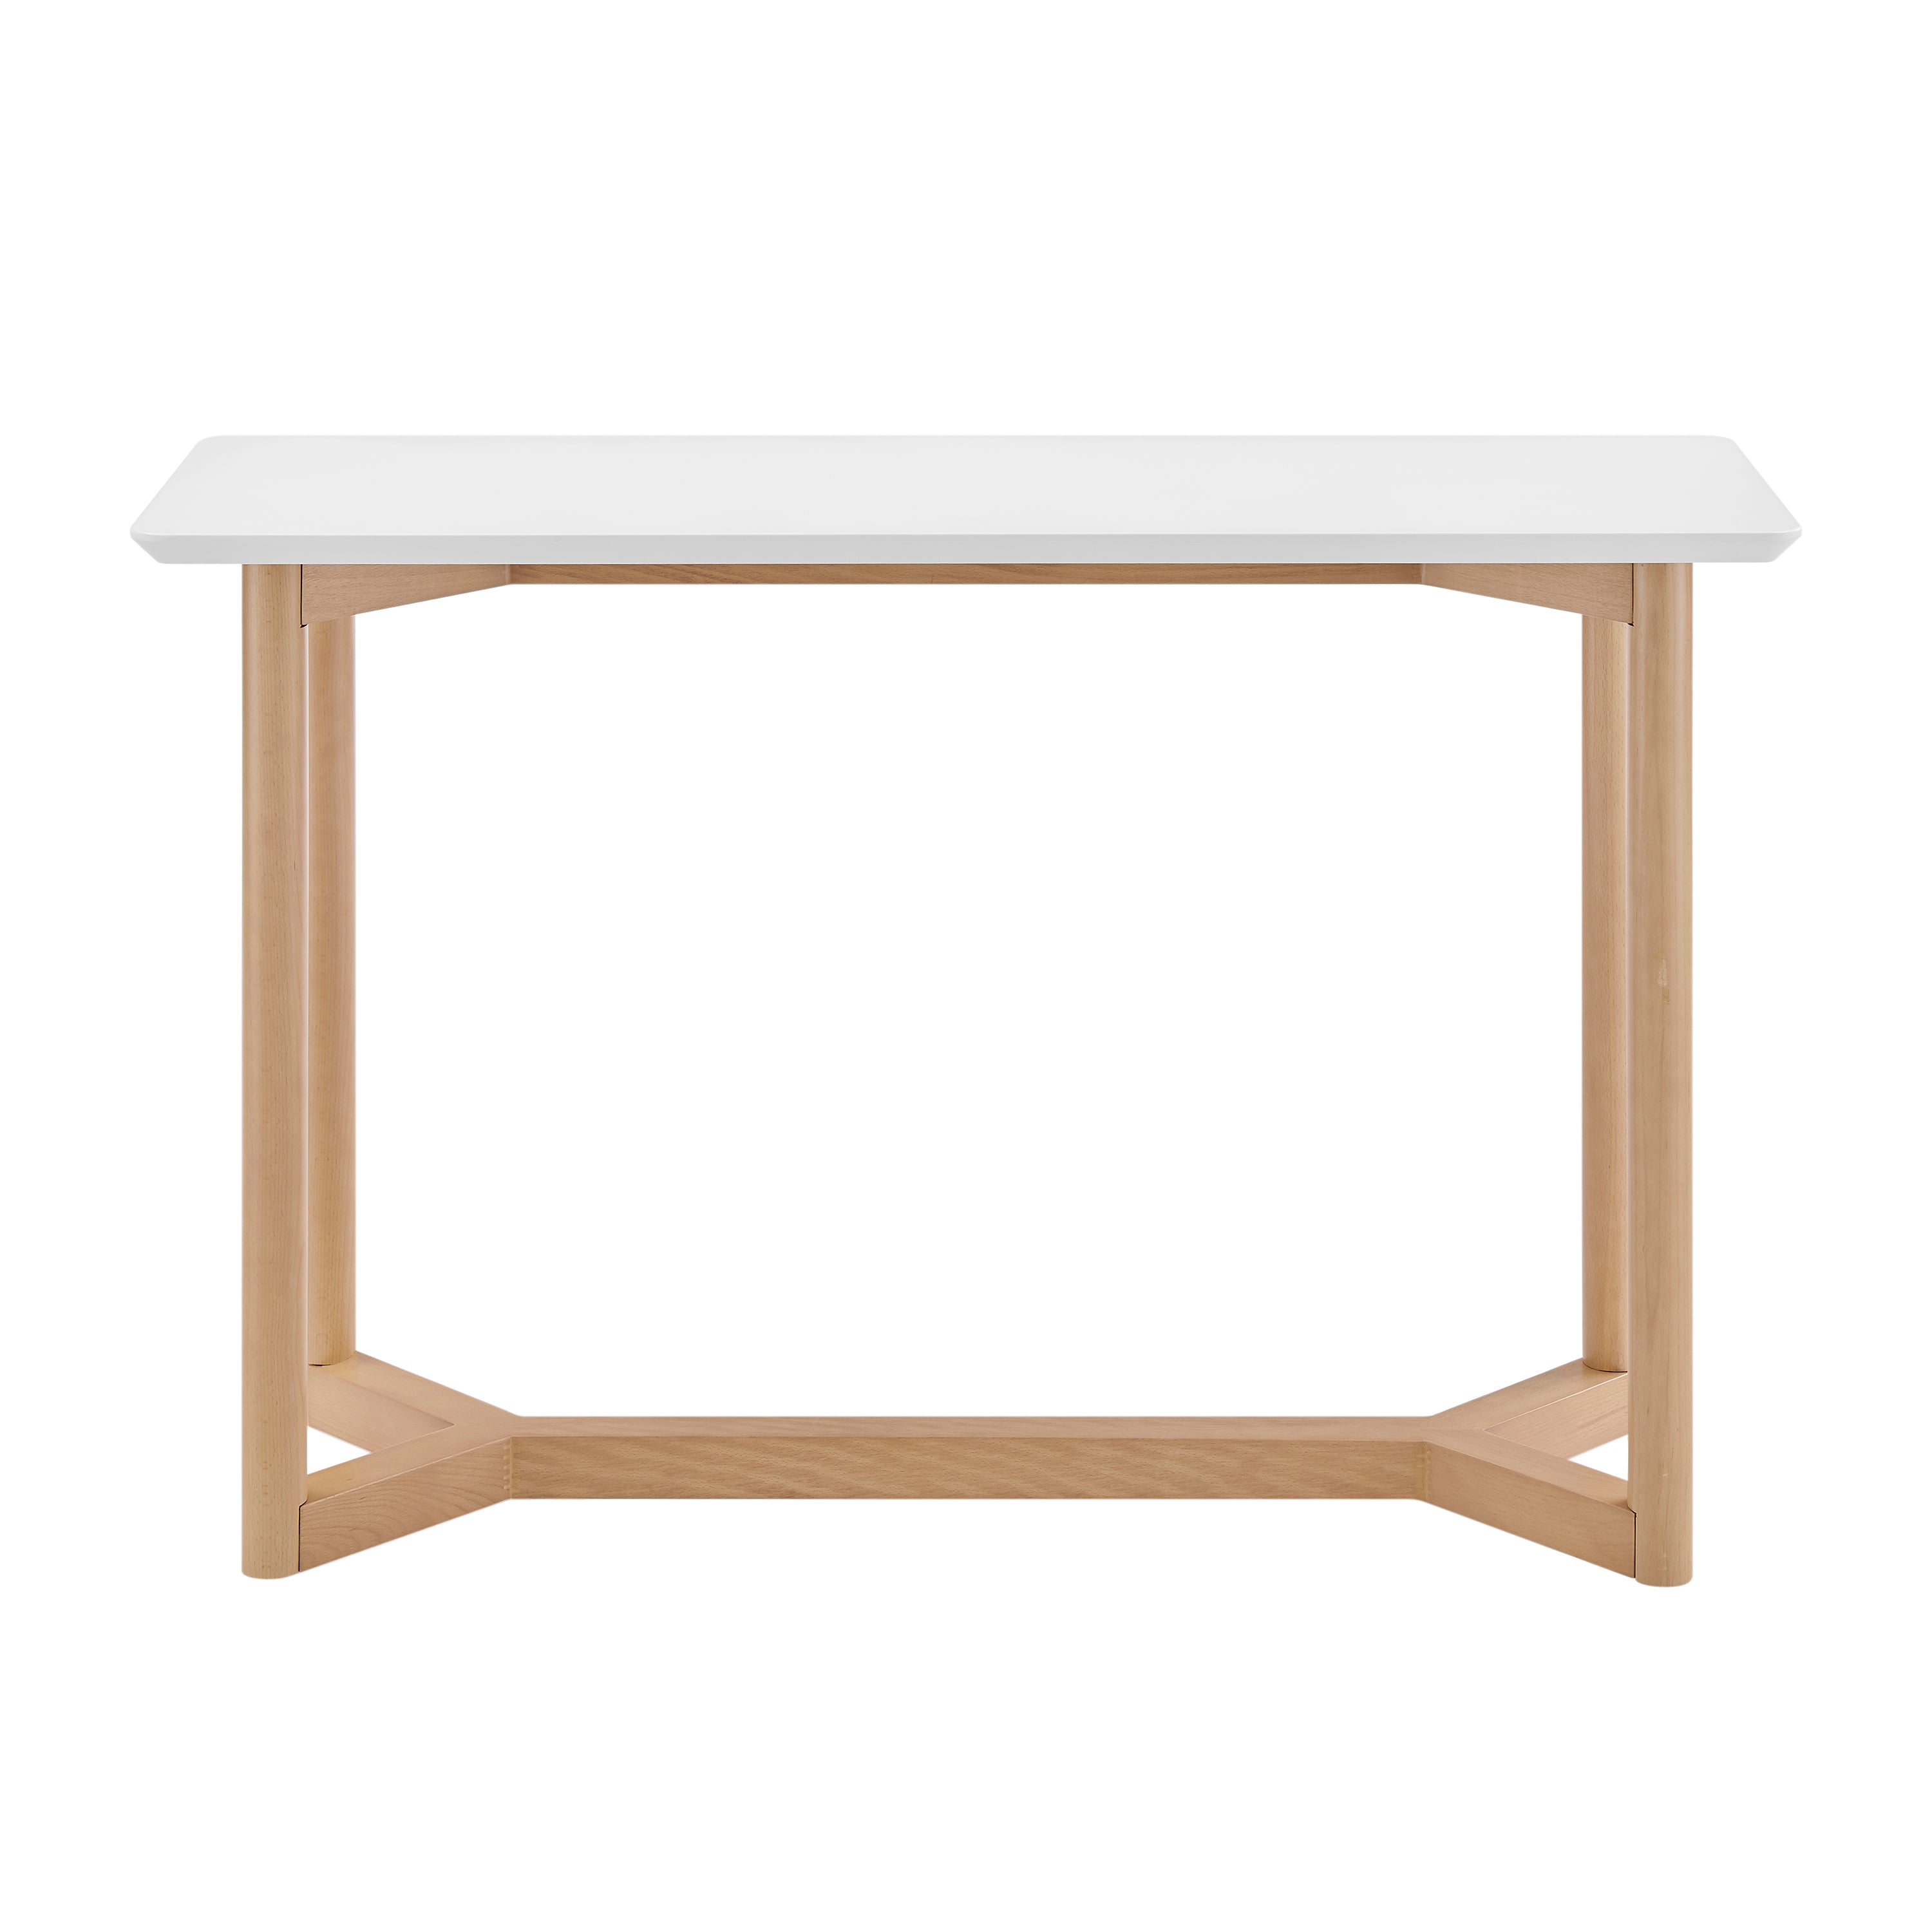 Euro Style Consoles - Aren 47" Console Table in Matte White with Natrual Beech Wood Base